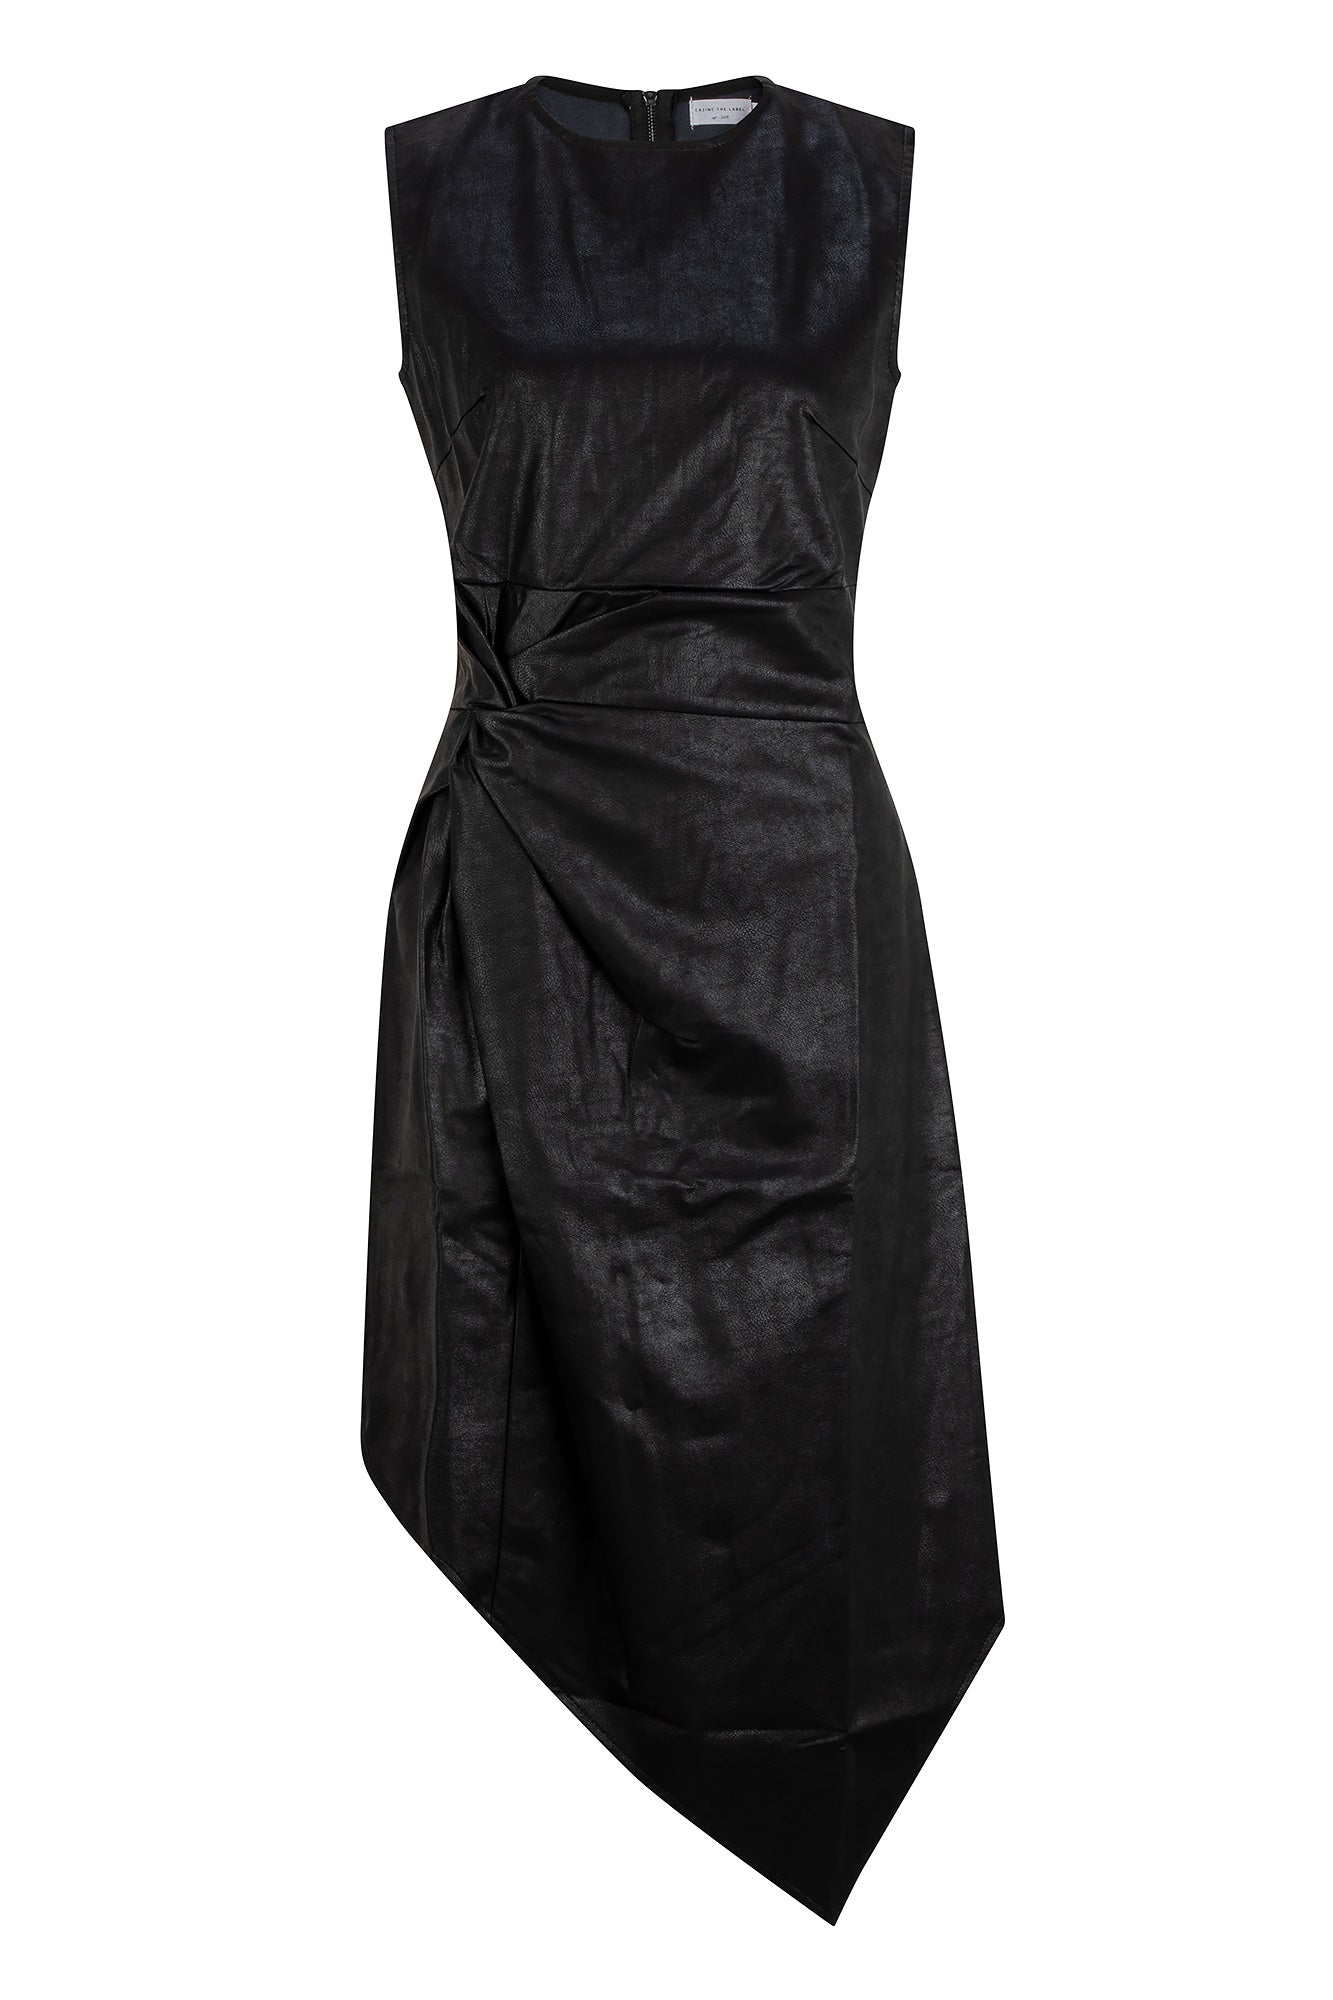 Harlow Faux Leather Dress - Midnight Black